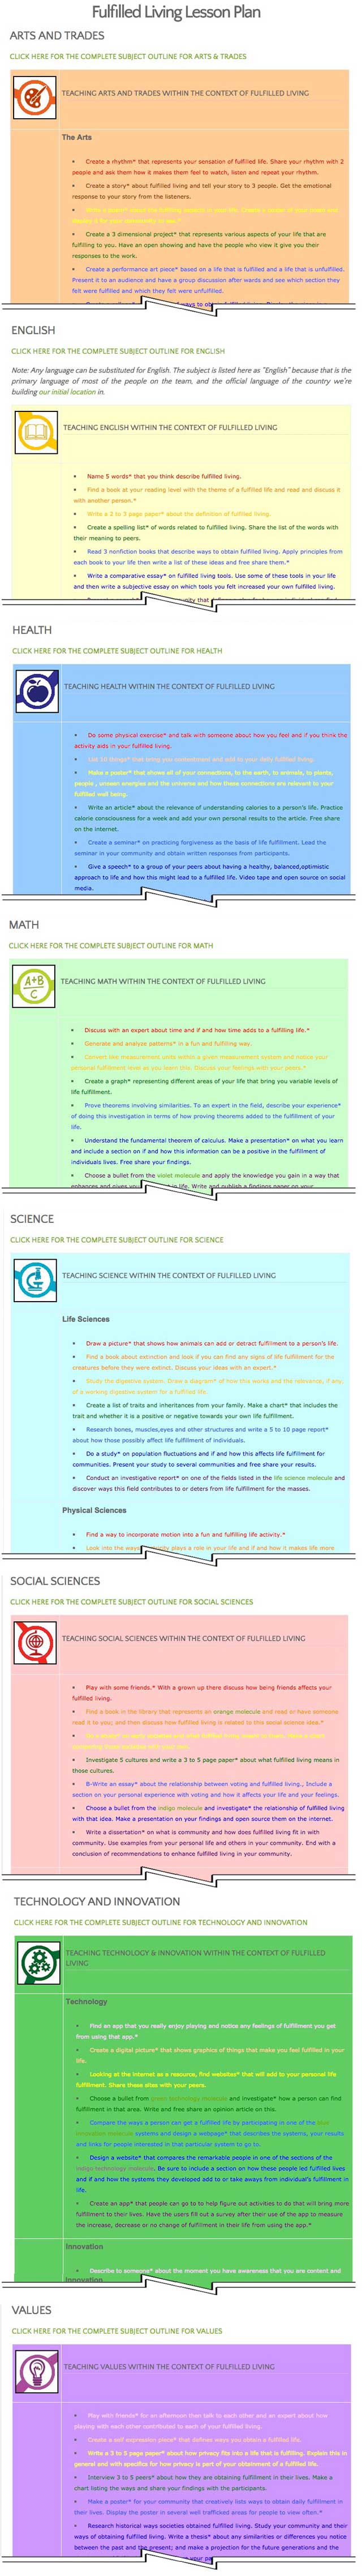 This last week the core team transferred all of the written content for the Fulfilled Living Lesson Plan to the website, as you see here. This lesson plan is purposed to teach all subjects, to all learning levels, in any learning environment, using the central theme of “Fulfilled Living